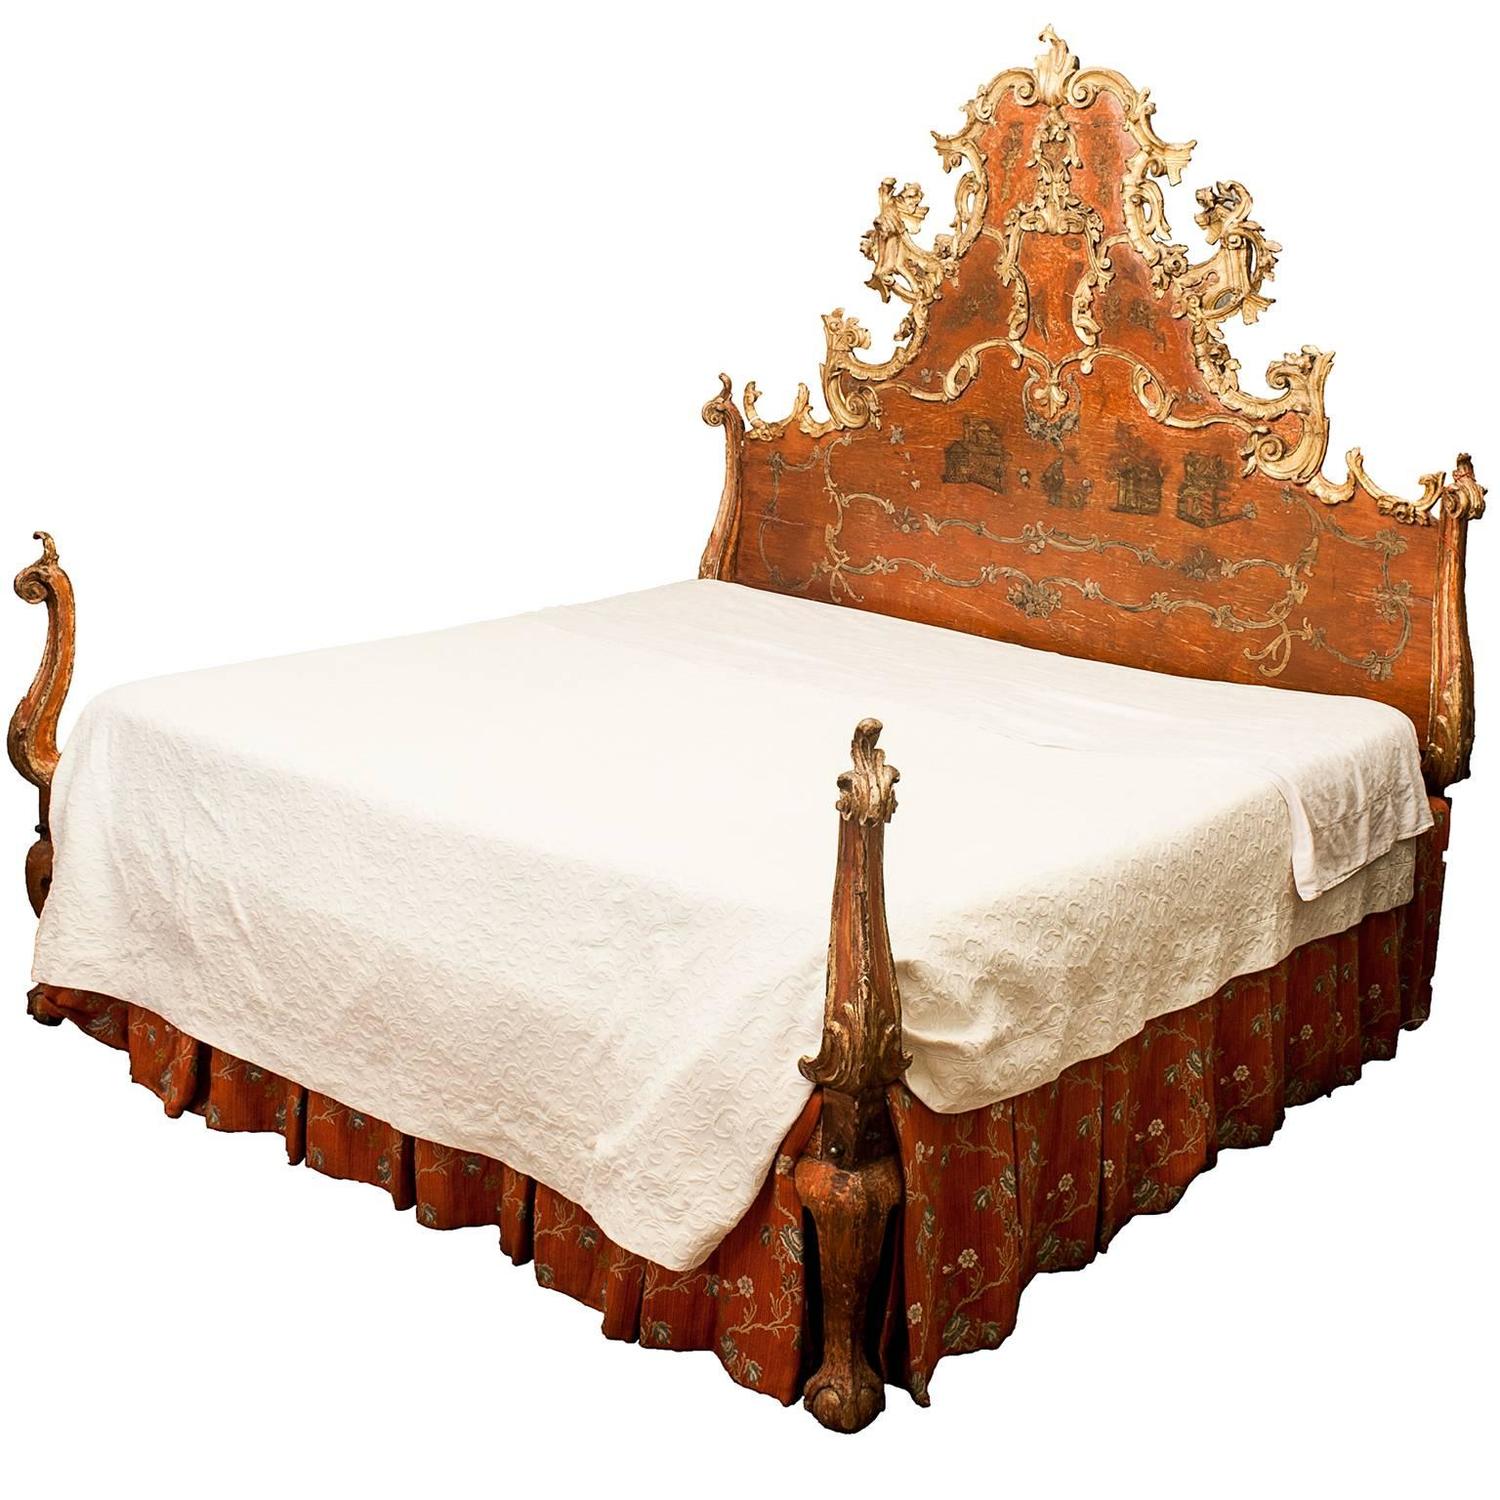 18th Century Spanish Baroque Bed For Sale at 1stdibs